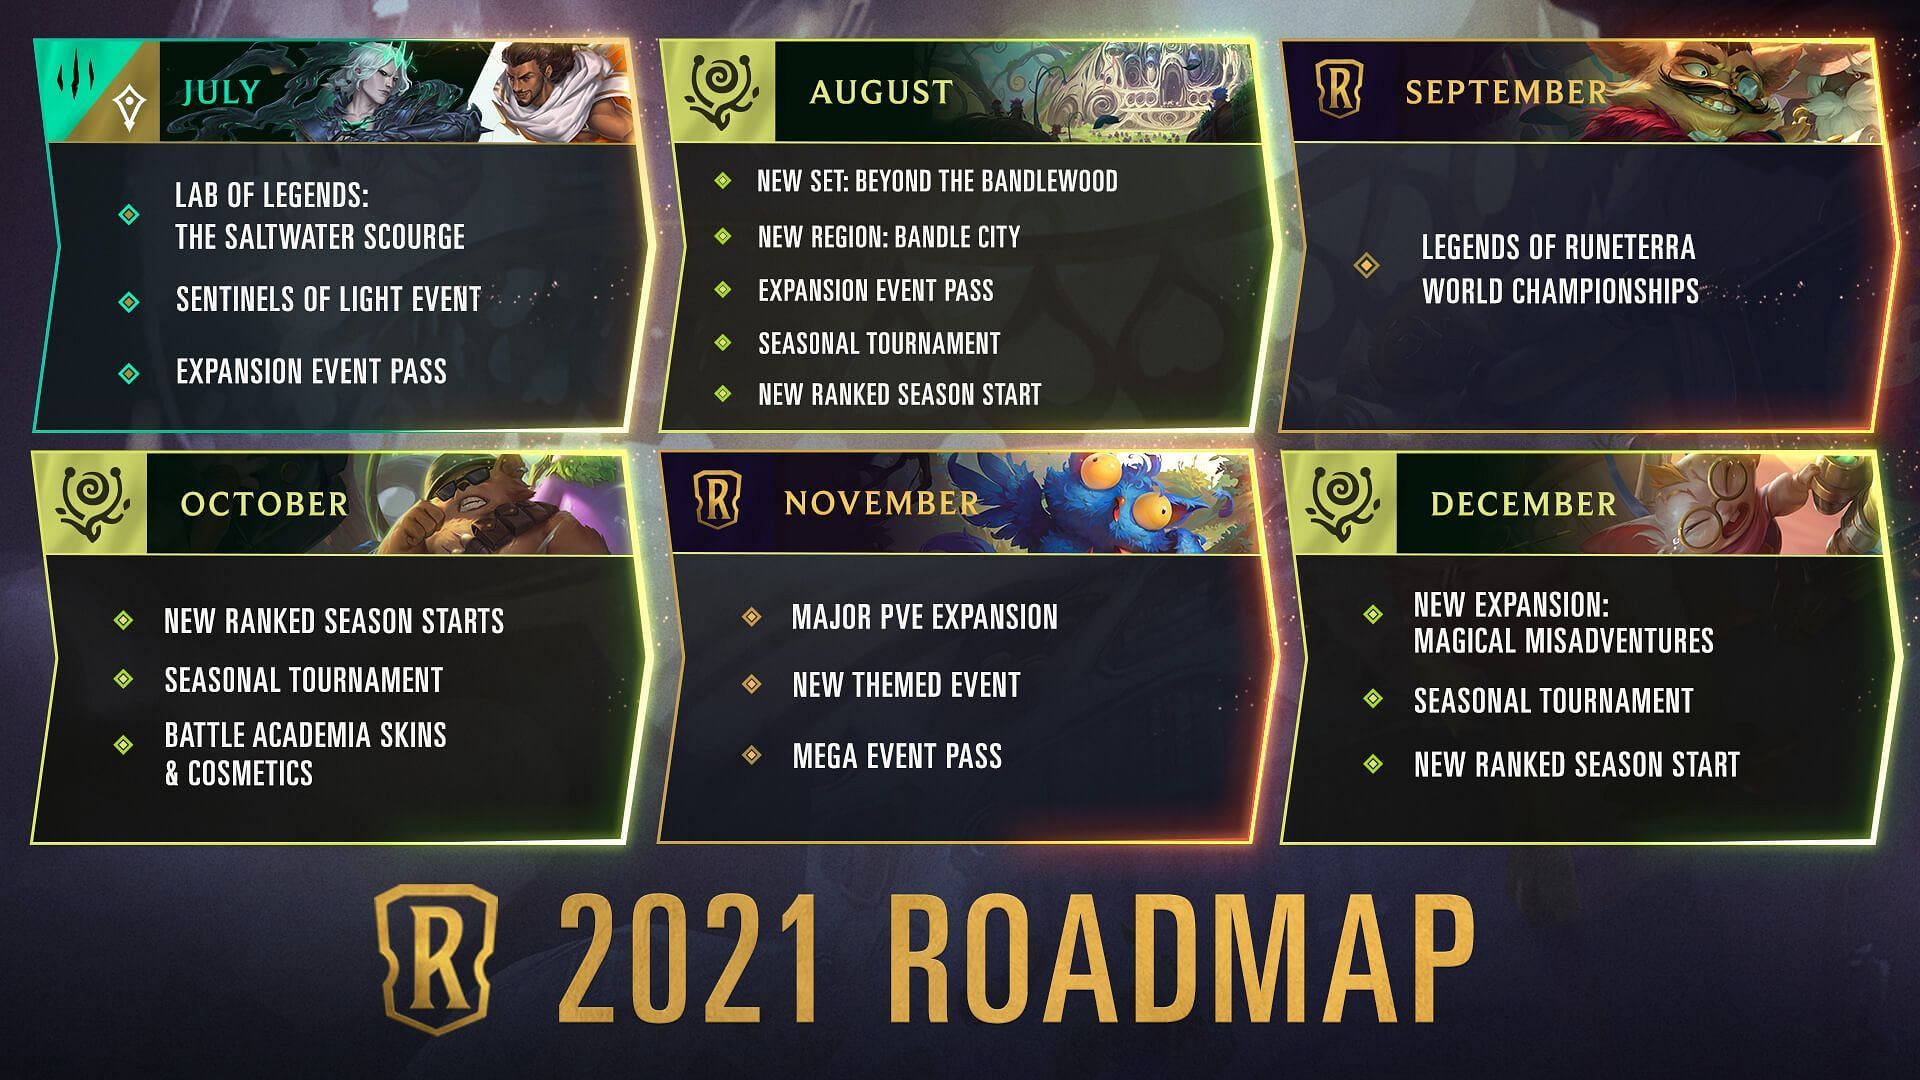 Things to come. (Image via Riot Games)